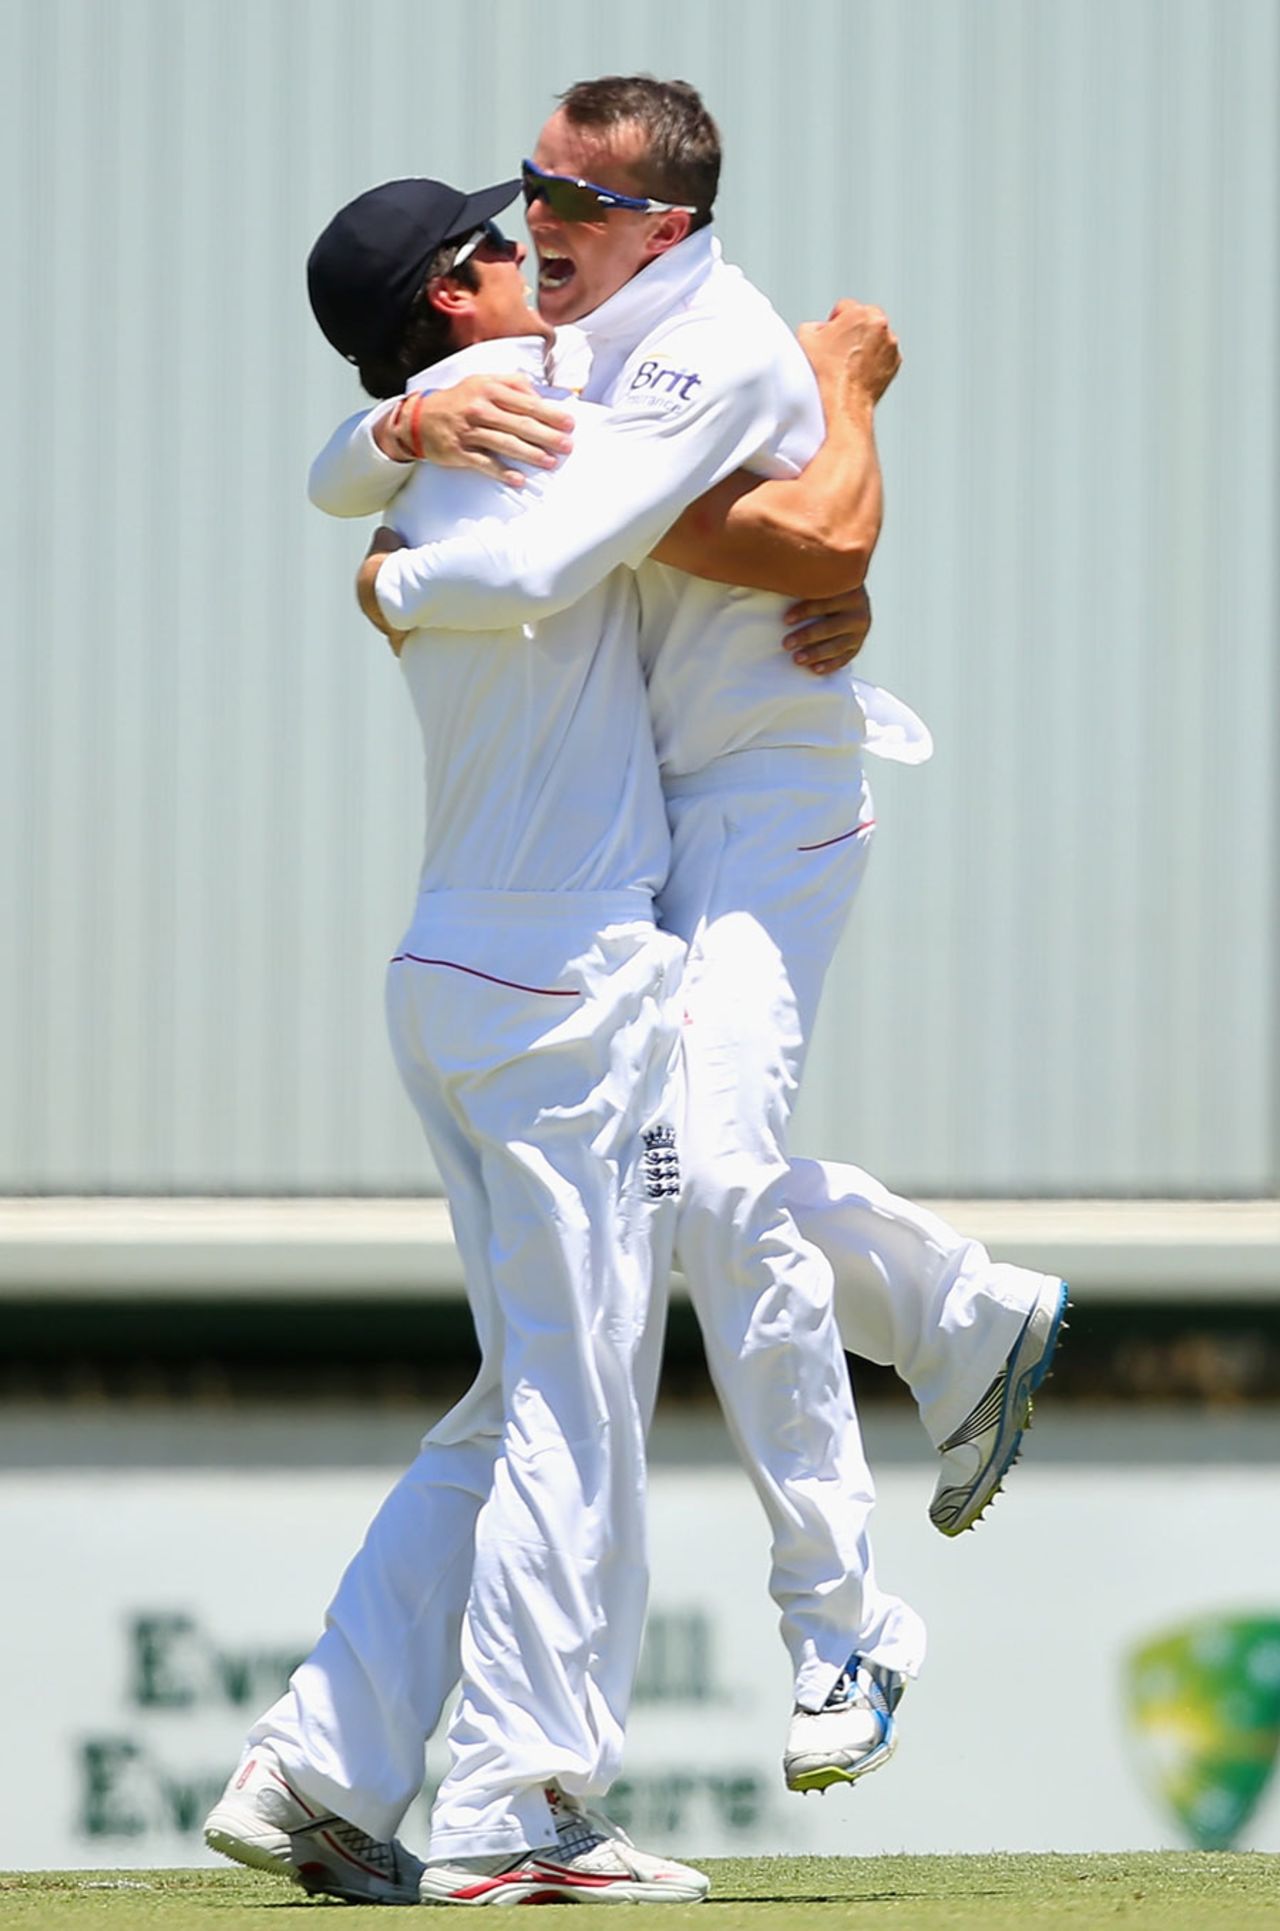 Alastair Cook catches Graeme Swann in his arms, Australia v England, 3rd Test, Perth, 1st day, December 13, 2013